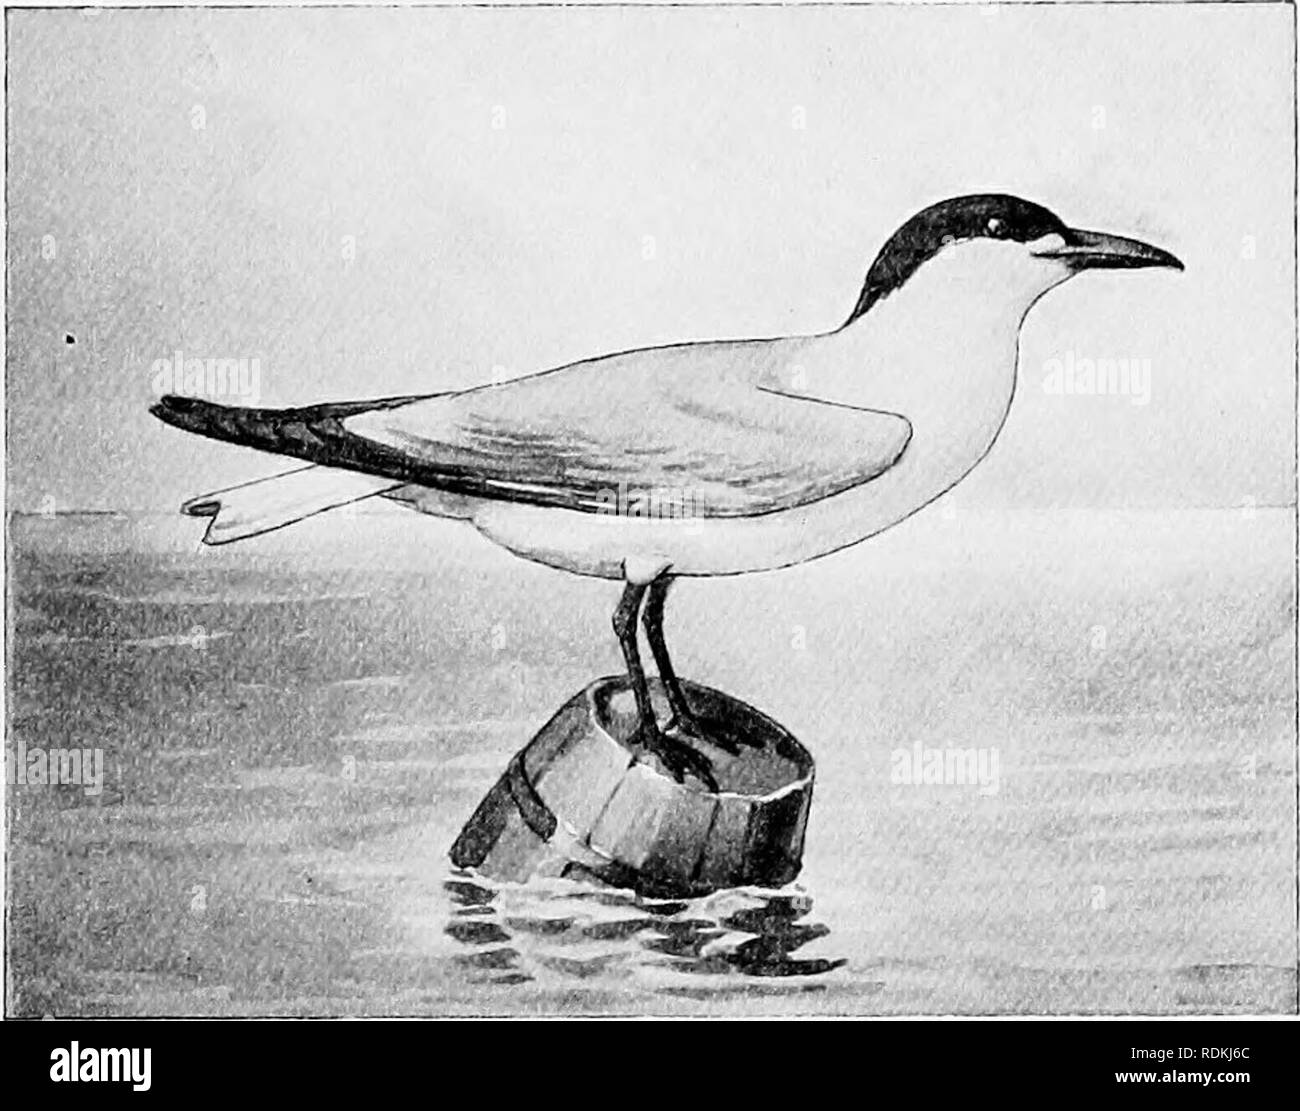 . The birds of Illinois and Wisconsin. Birds; Birds. Jan., 1909. Birds of Illinois and Wisconsin — Cory. 299 Genus STERNA Linn. 23. Sterna caspia Pallas. Caspian Tern. Sterna tschegrava (Lepech), A. O. U. Check List, 1895, p. 23. Distr.: A nearly cosmopolitan species; in North America breed- ing along the middle Atlantic and Pacific coasts and in parts of the interior. Adult in spring: Entire top of head, black, the black extending below the eye; the occipital feathers, lengthened, extending to the. Caspian Tern. nape; back and'wings, pale pearl gray; rest of plumage, white; pri- maries, ash g Stock Photo